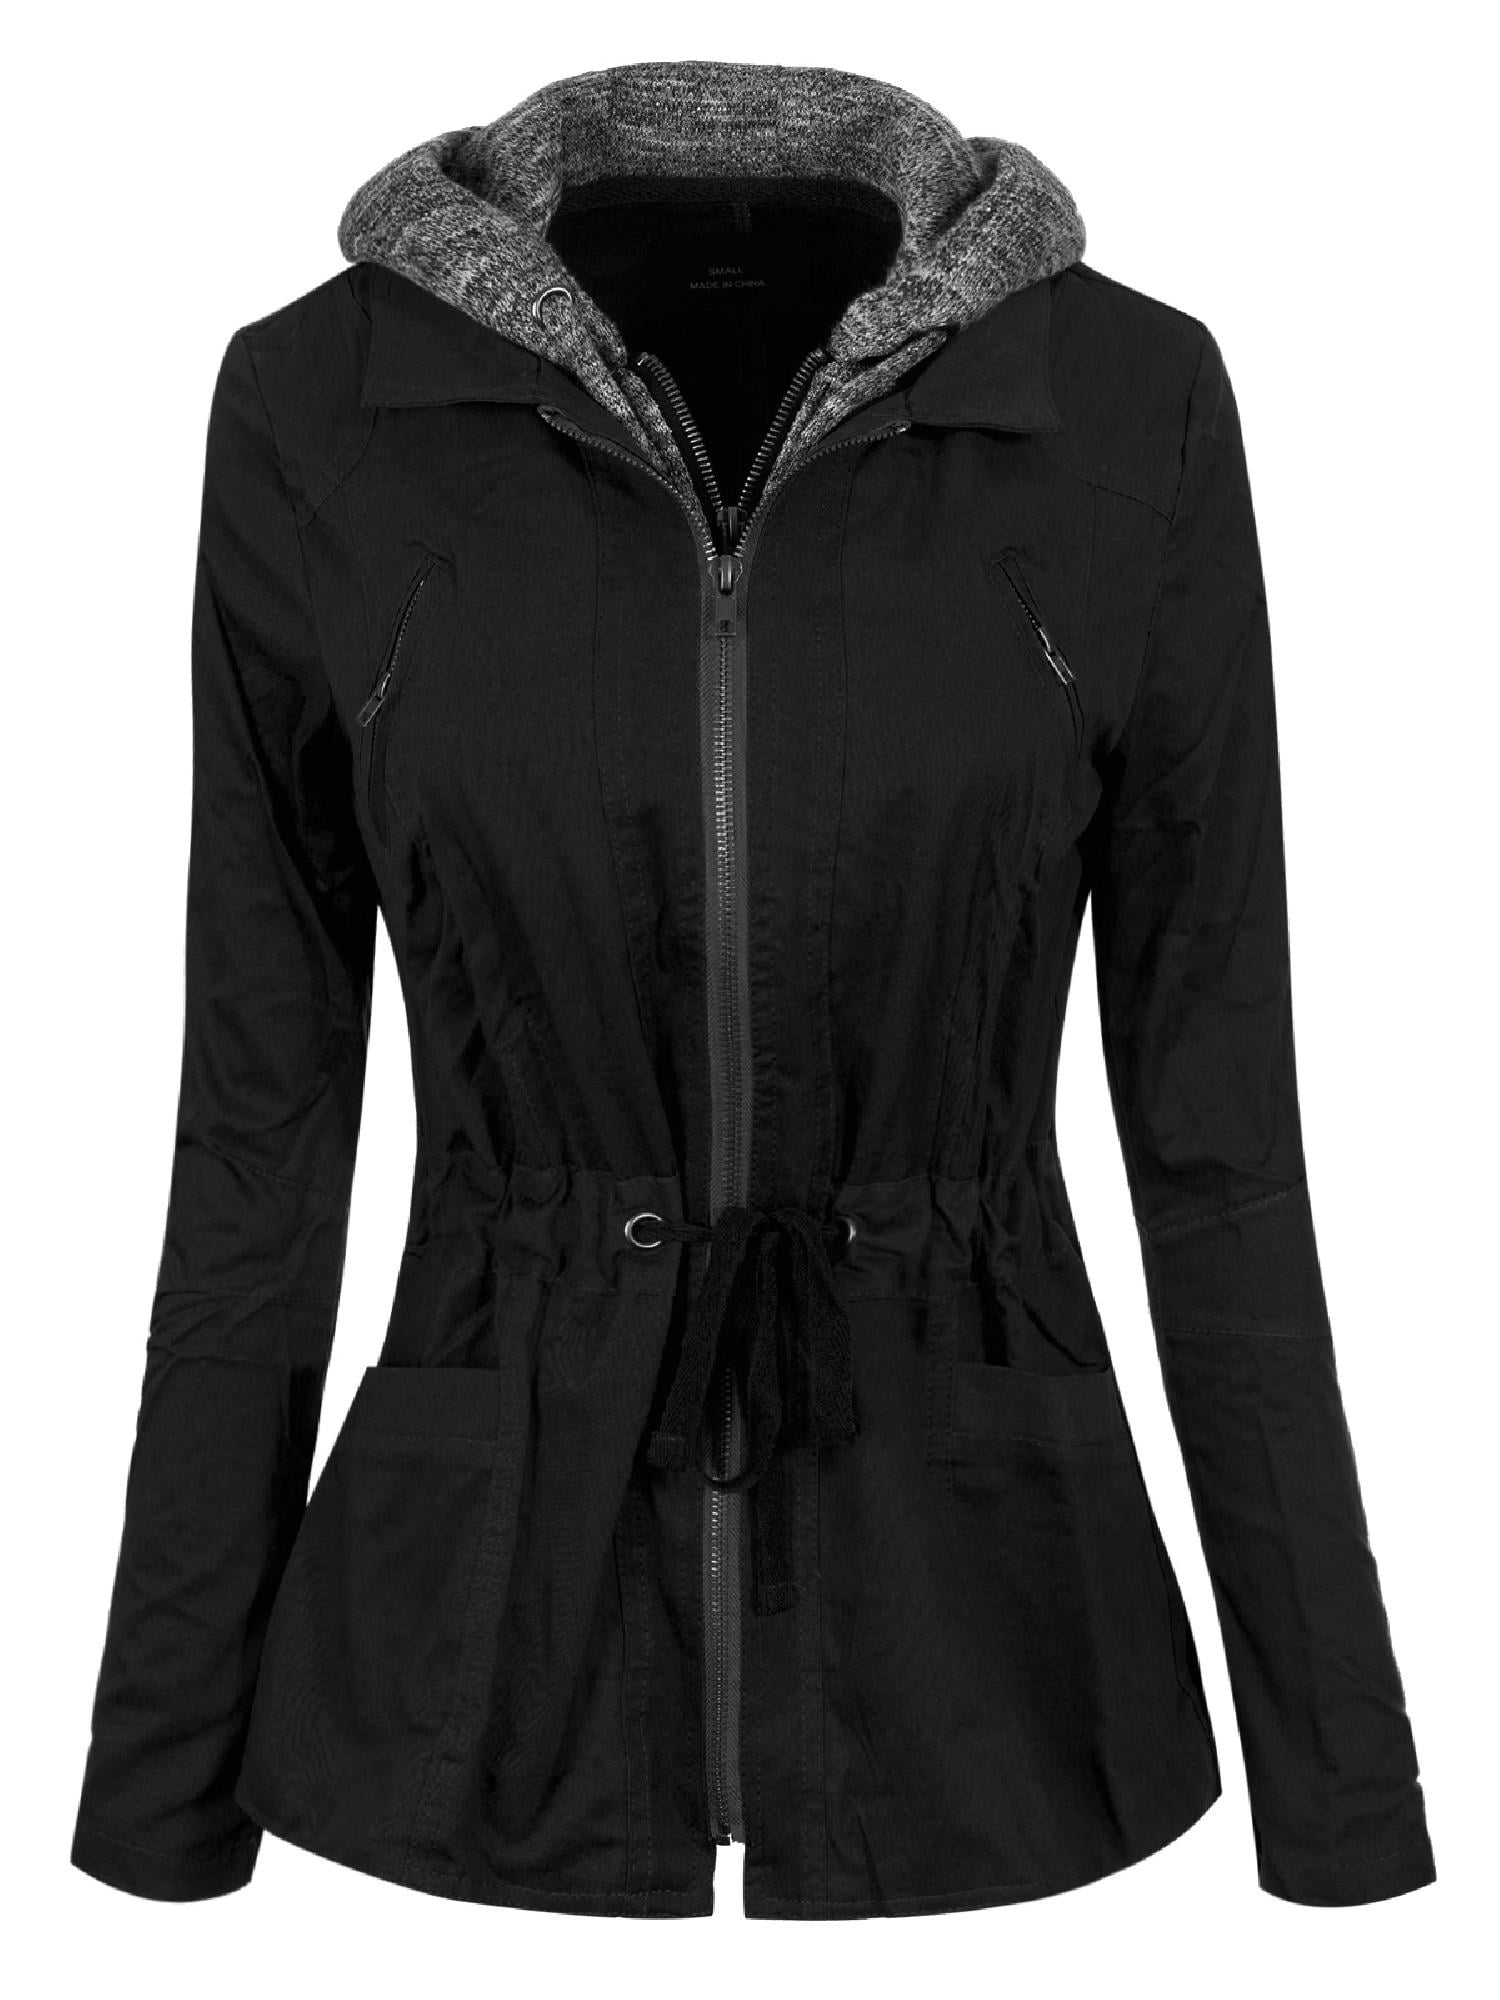 MixMatchy Women's Contrast Knit Hood Anorak Utility Jacket with Double ...